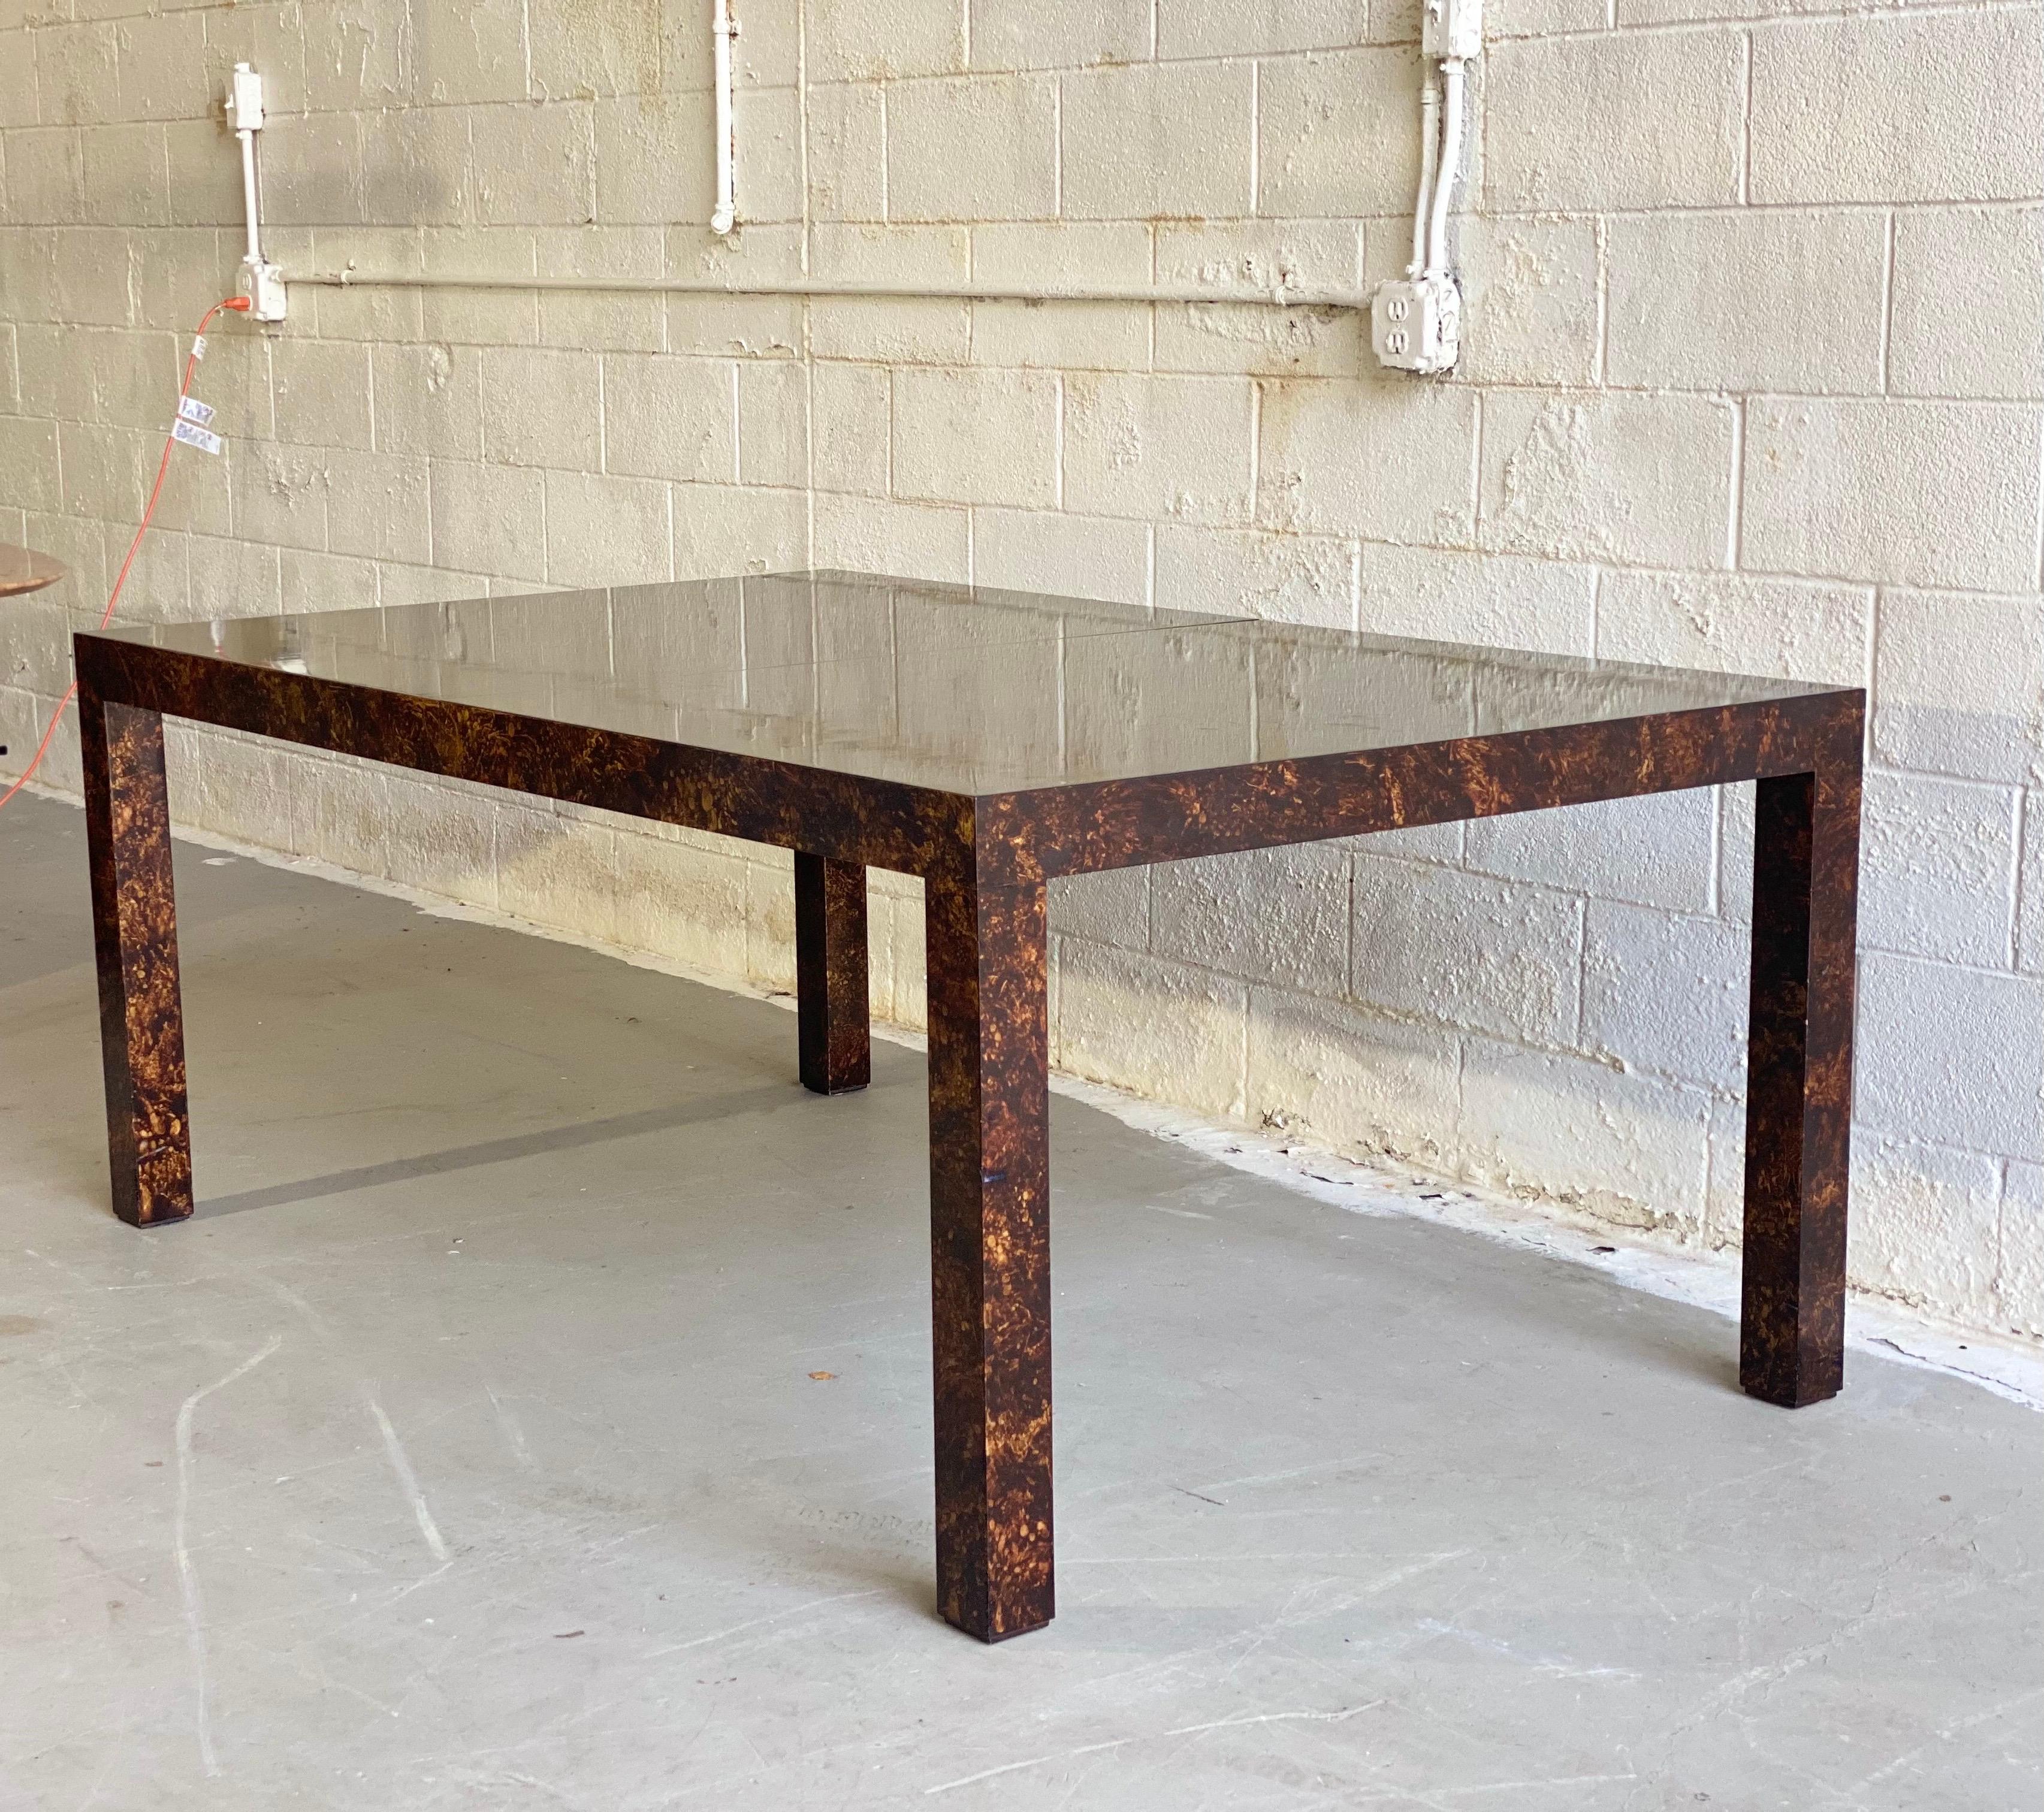 We are very pleased to offer a chic, parsons dining table, circa the 1970s. This beautiful expanding table showcases a lacquered oil drop technique that creates an exquisite faux tortoiseshell finish. Perfect for entertaining flexibility, this table